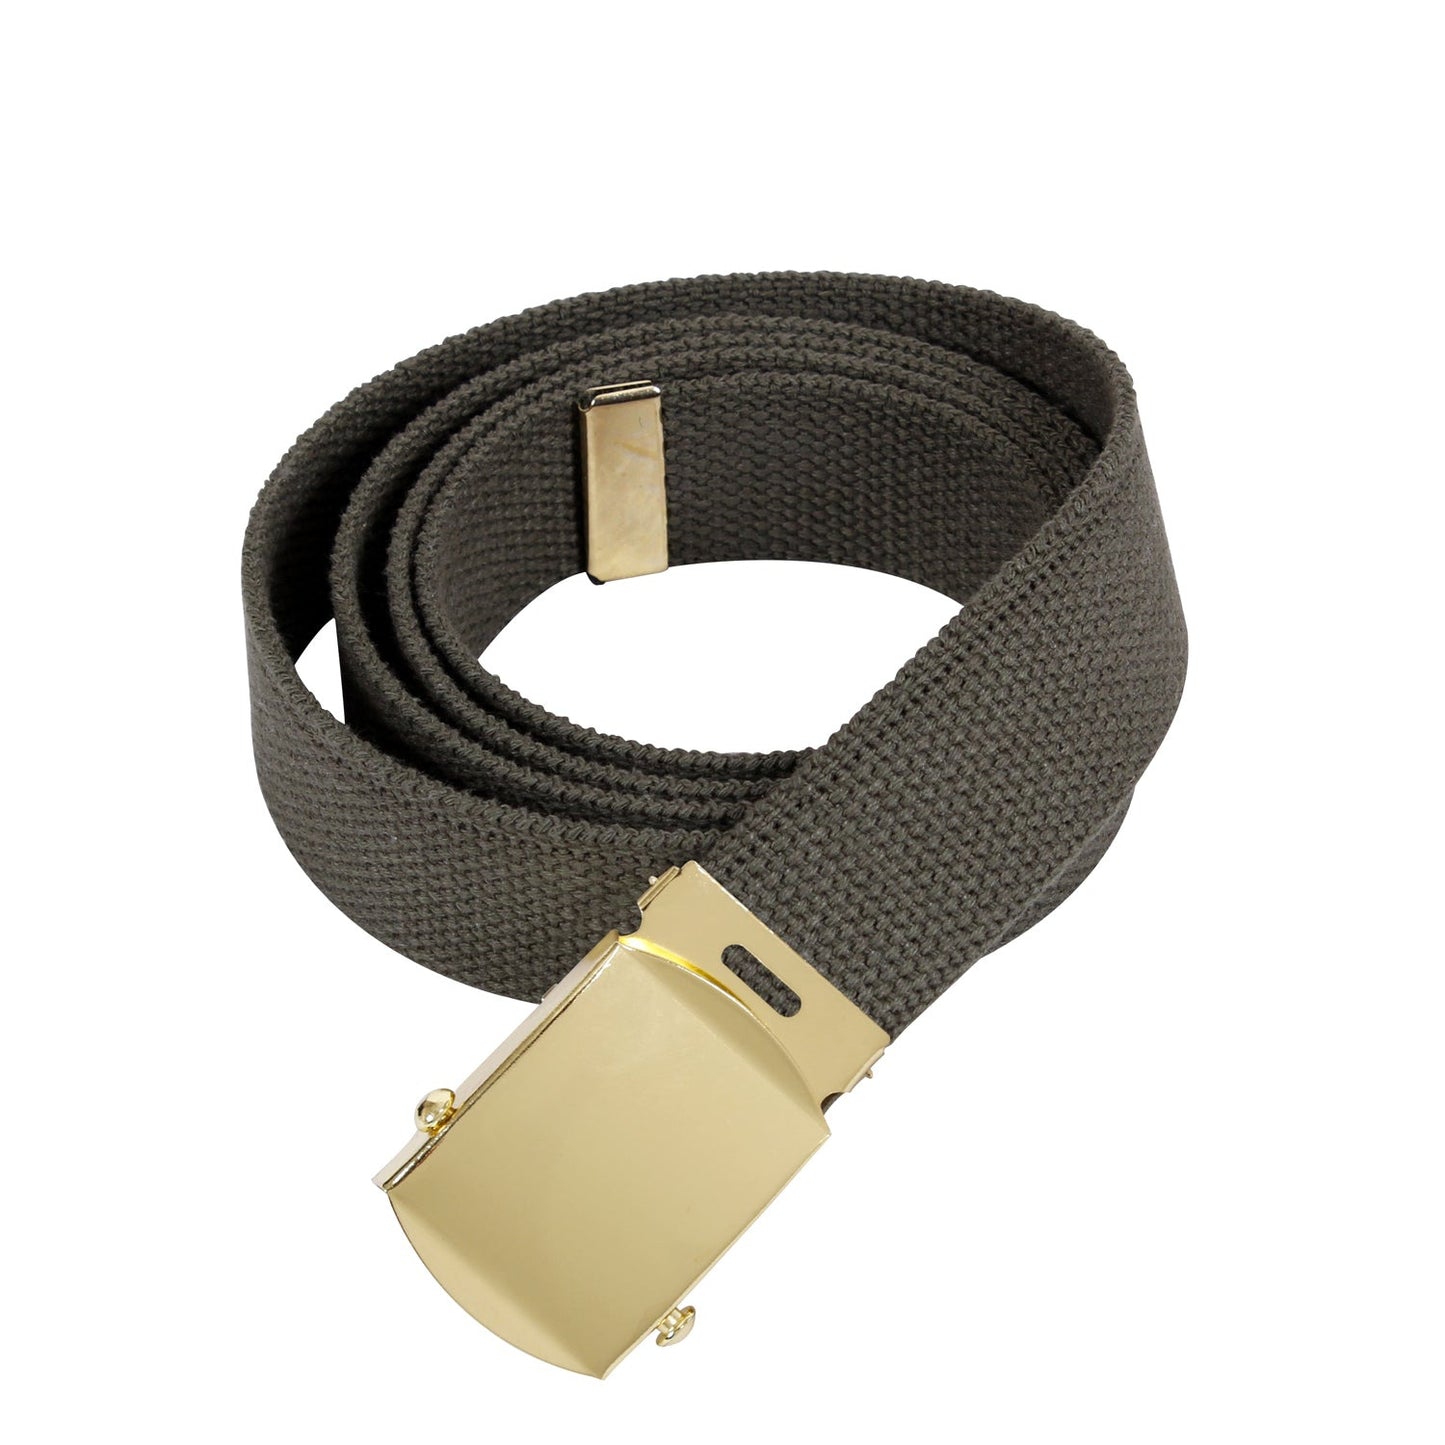 Long-lasting and fully customizable, Rothco's Military Web Belts can easily be cut for the perfect fit (up to 54 inches long). The military-grade cotton material is available in over a dozen belt and buckle options. Additional lengths (44", 64" and 74") are also available, see matching items below. 